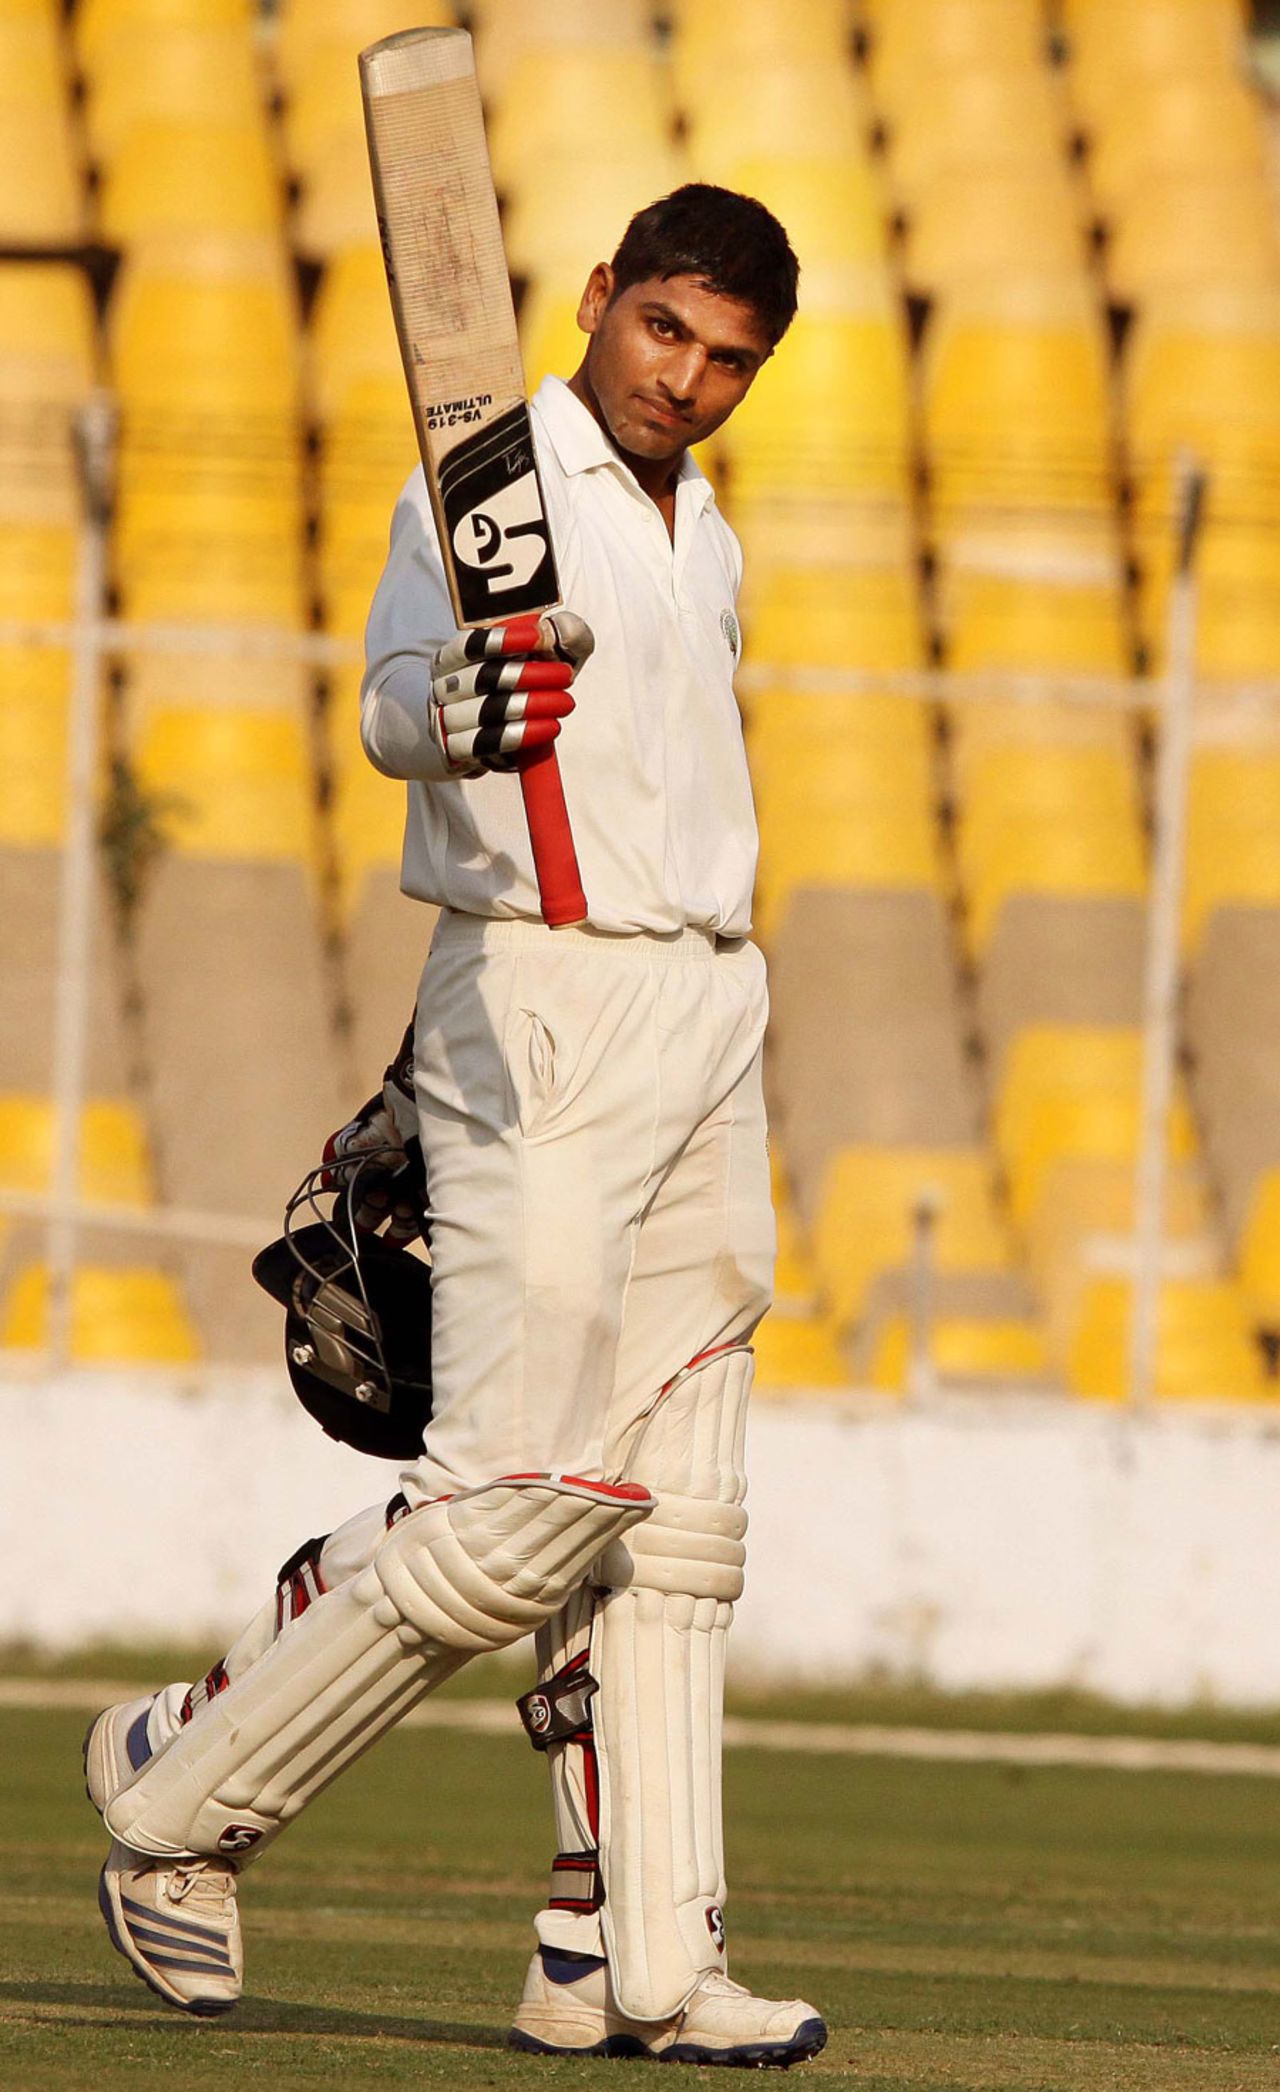 Nitin Saini sneaks a look at the camera after reaching a century, Gujarat v Haryana, Ranji Trophy 2013-14, Group A, 2nd day, Ahmedabad, December 15, 2013